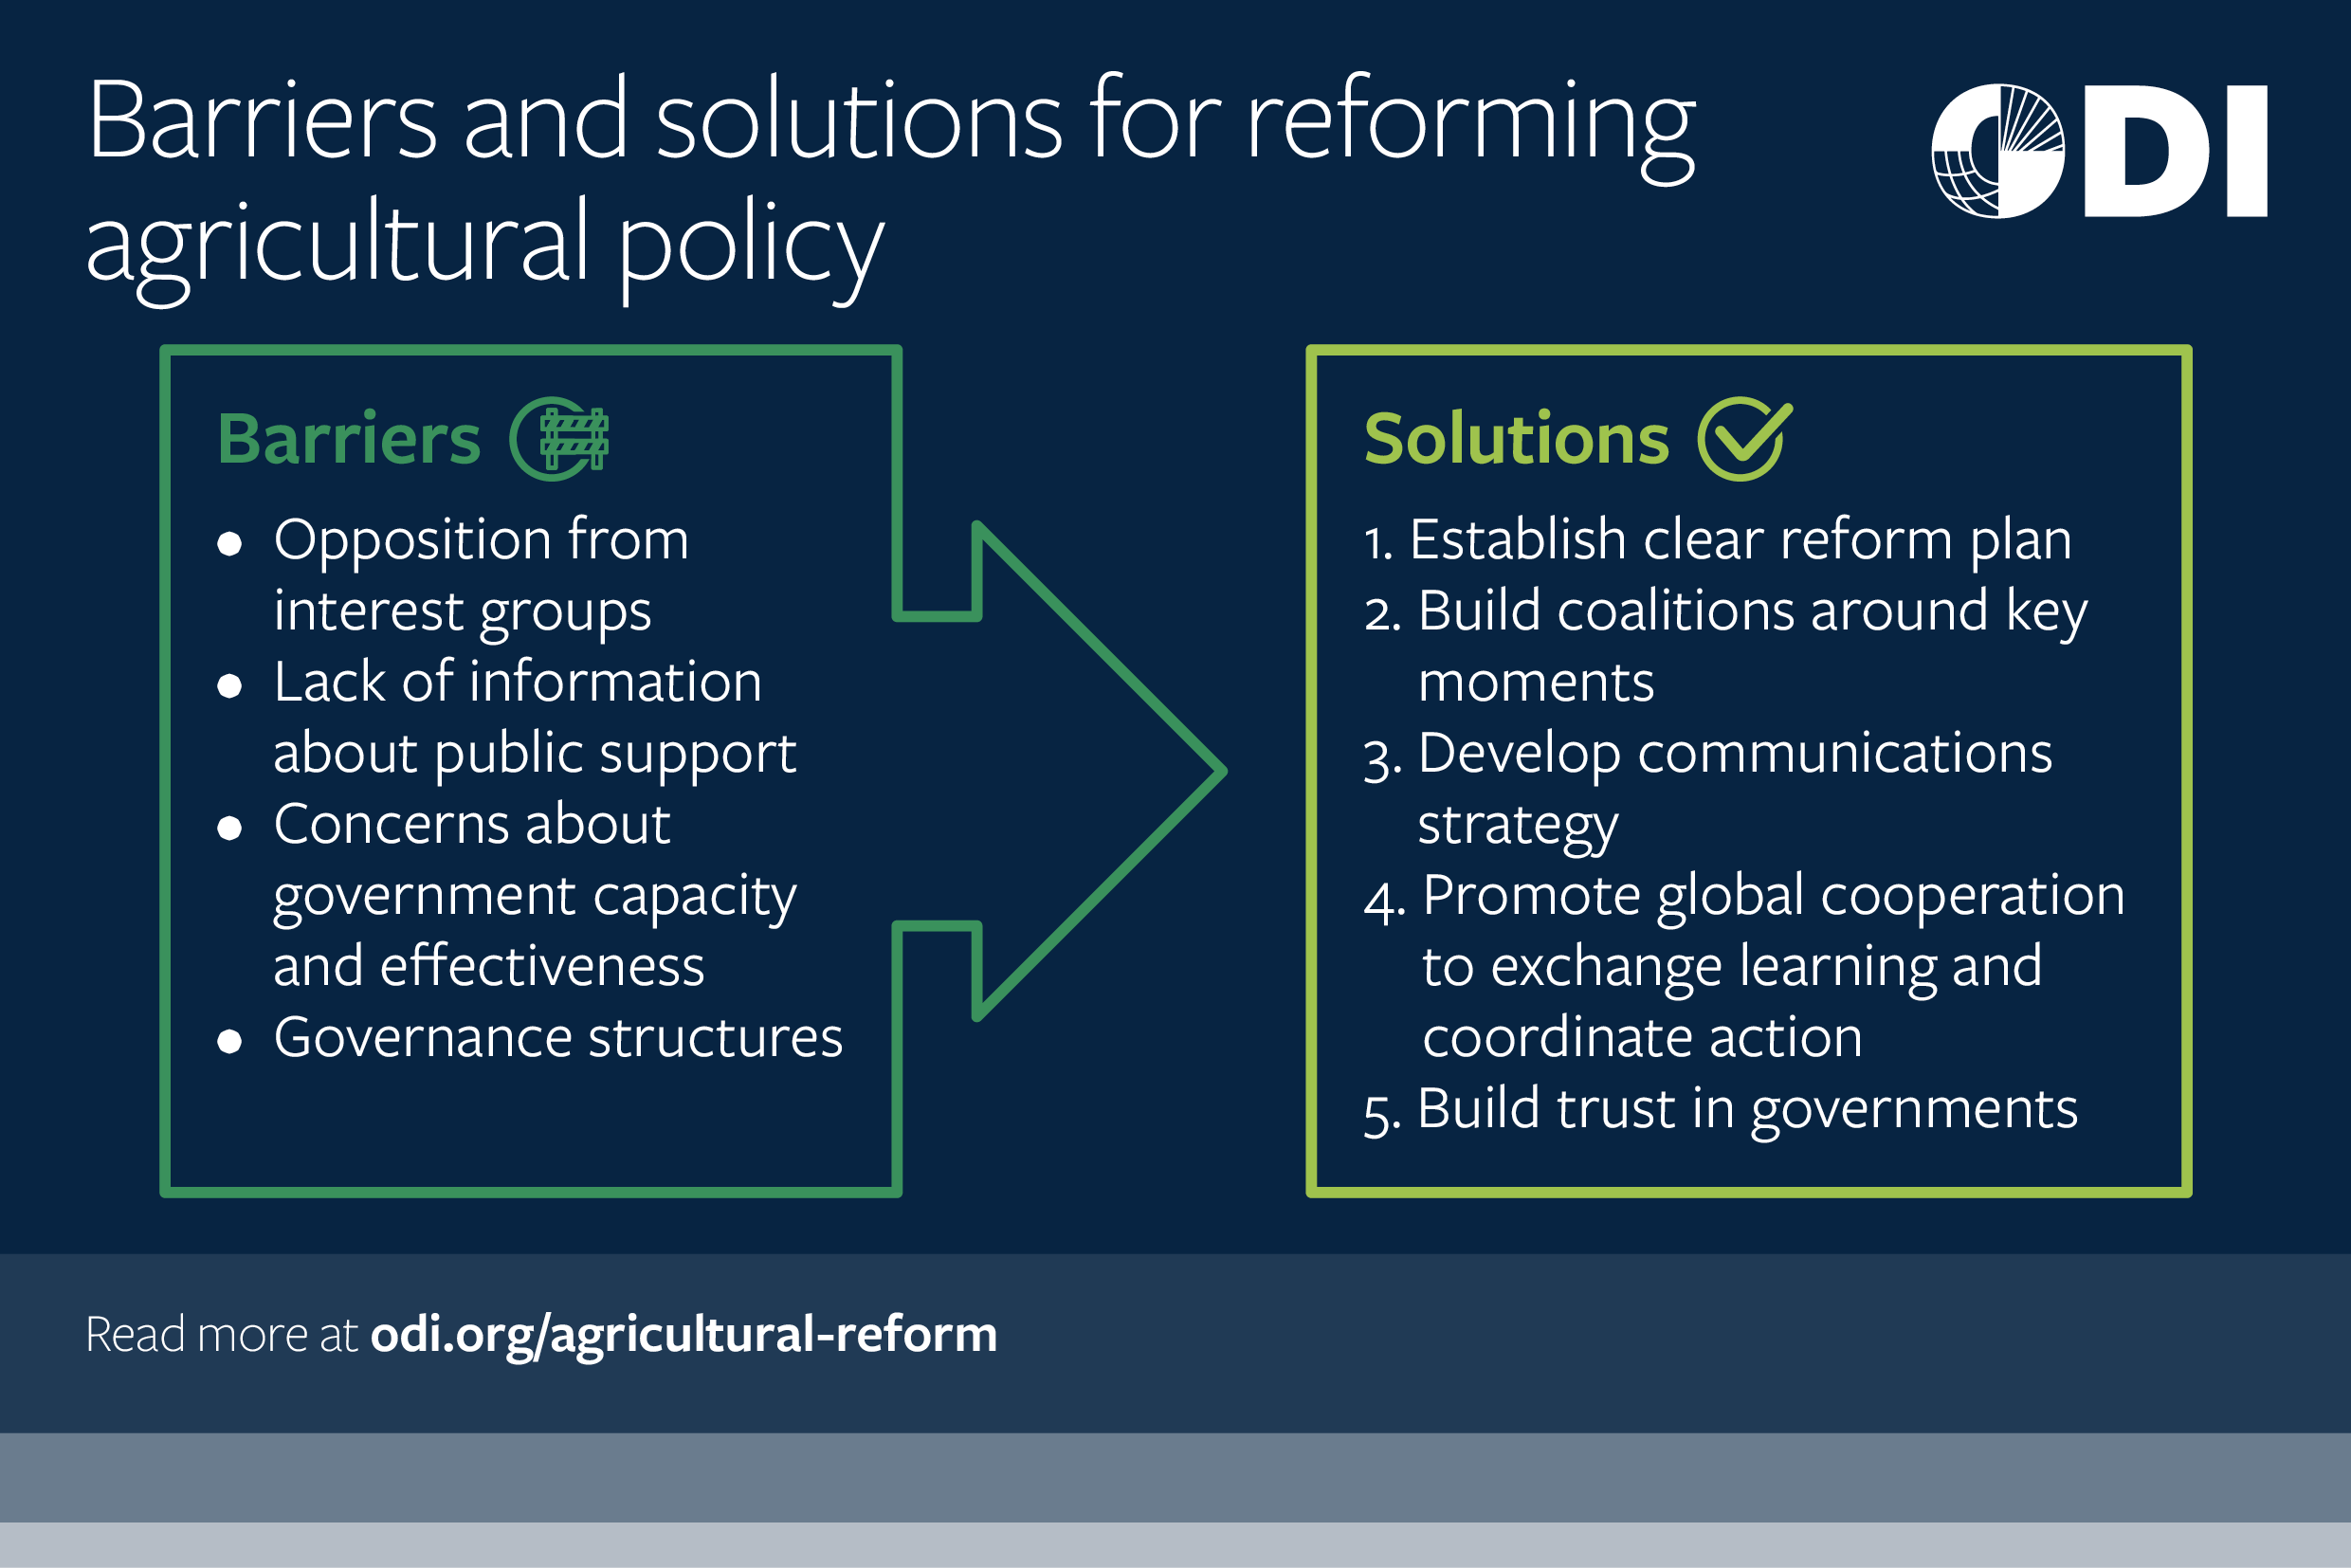 Barriers and solutions for reforming agricultural policy